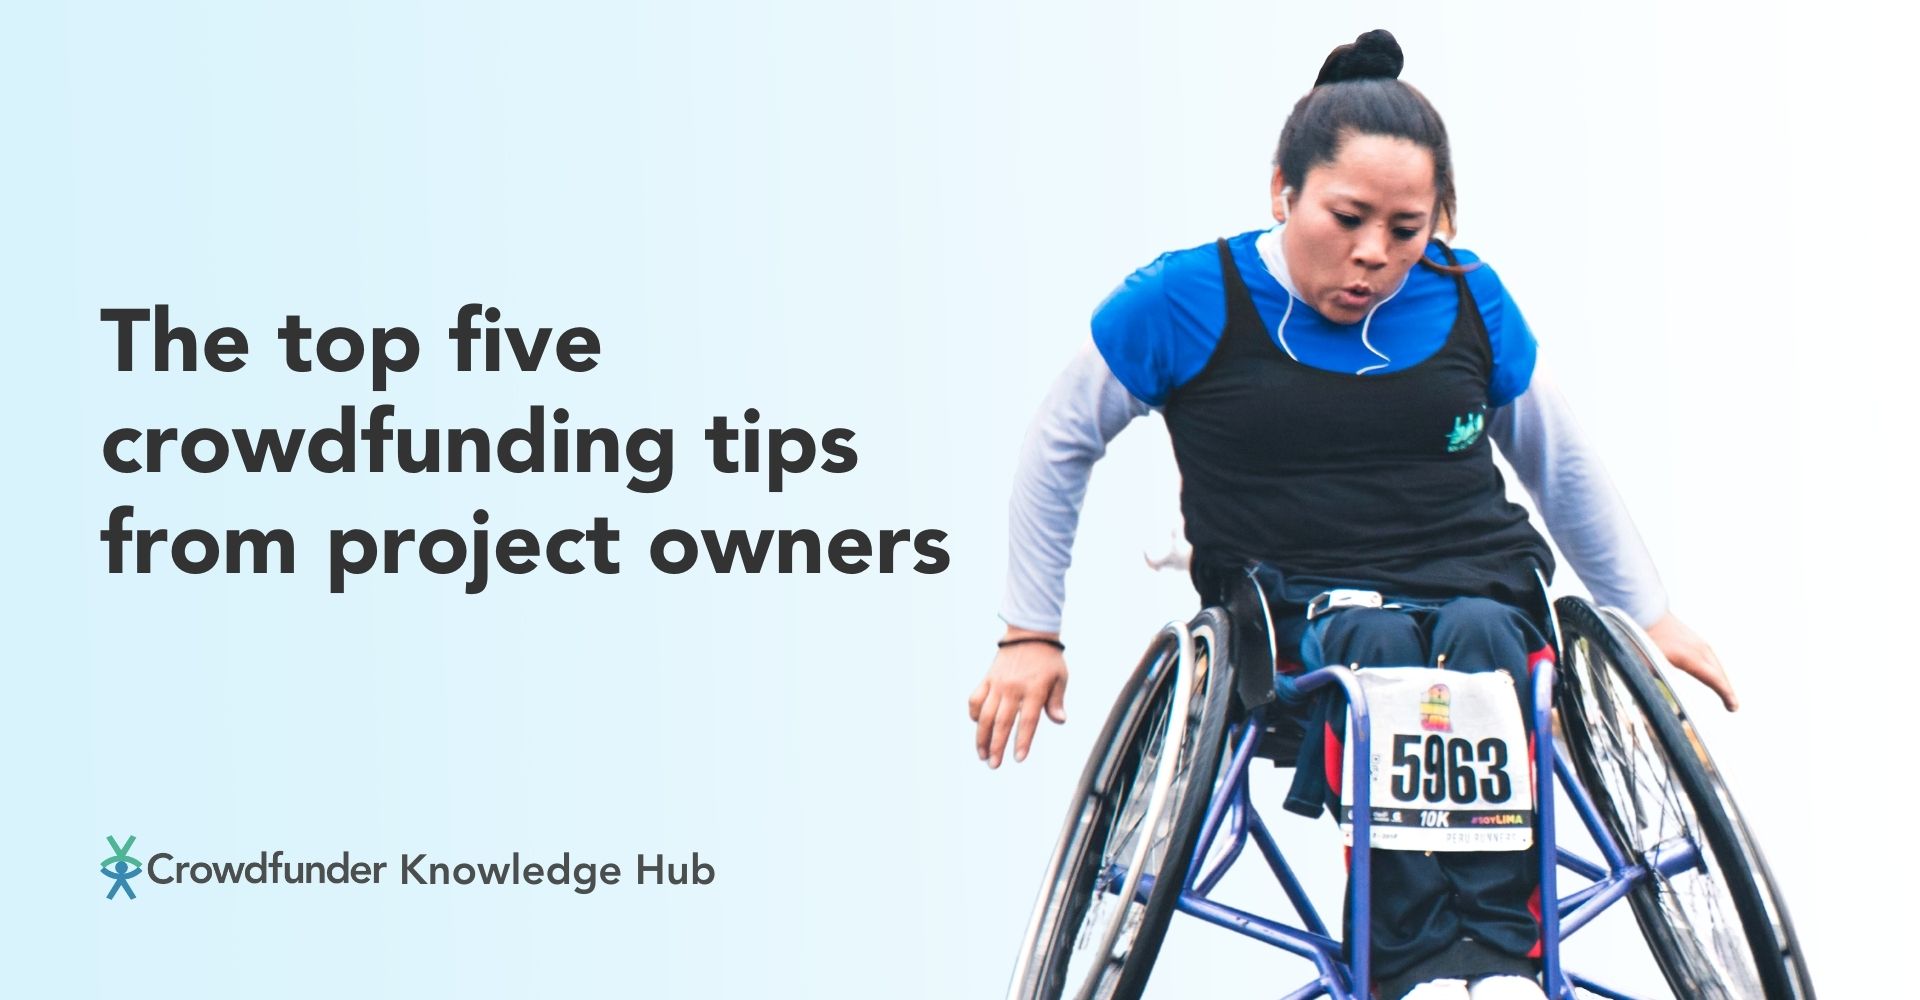 The top five crowdfunding tips from our project owners